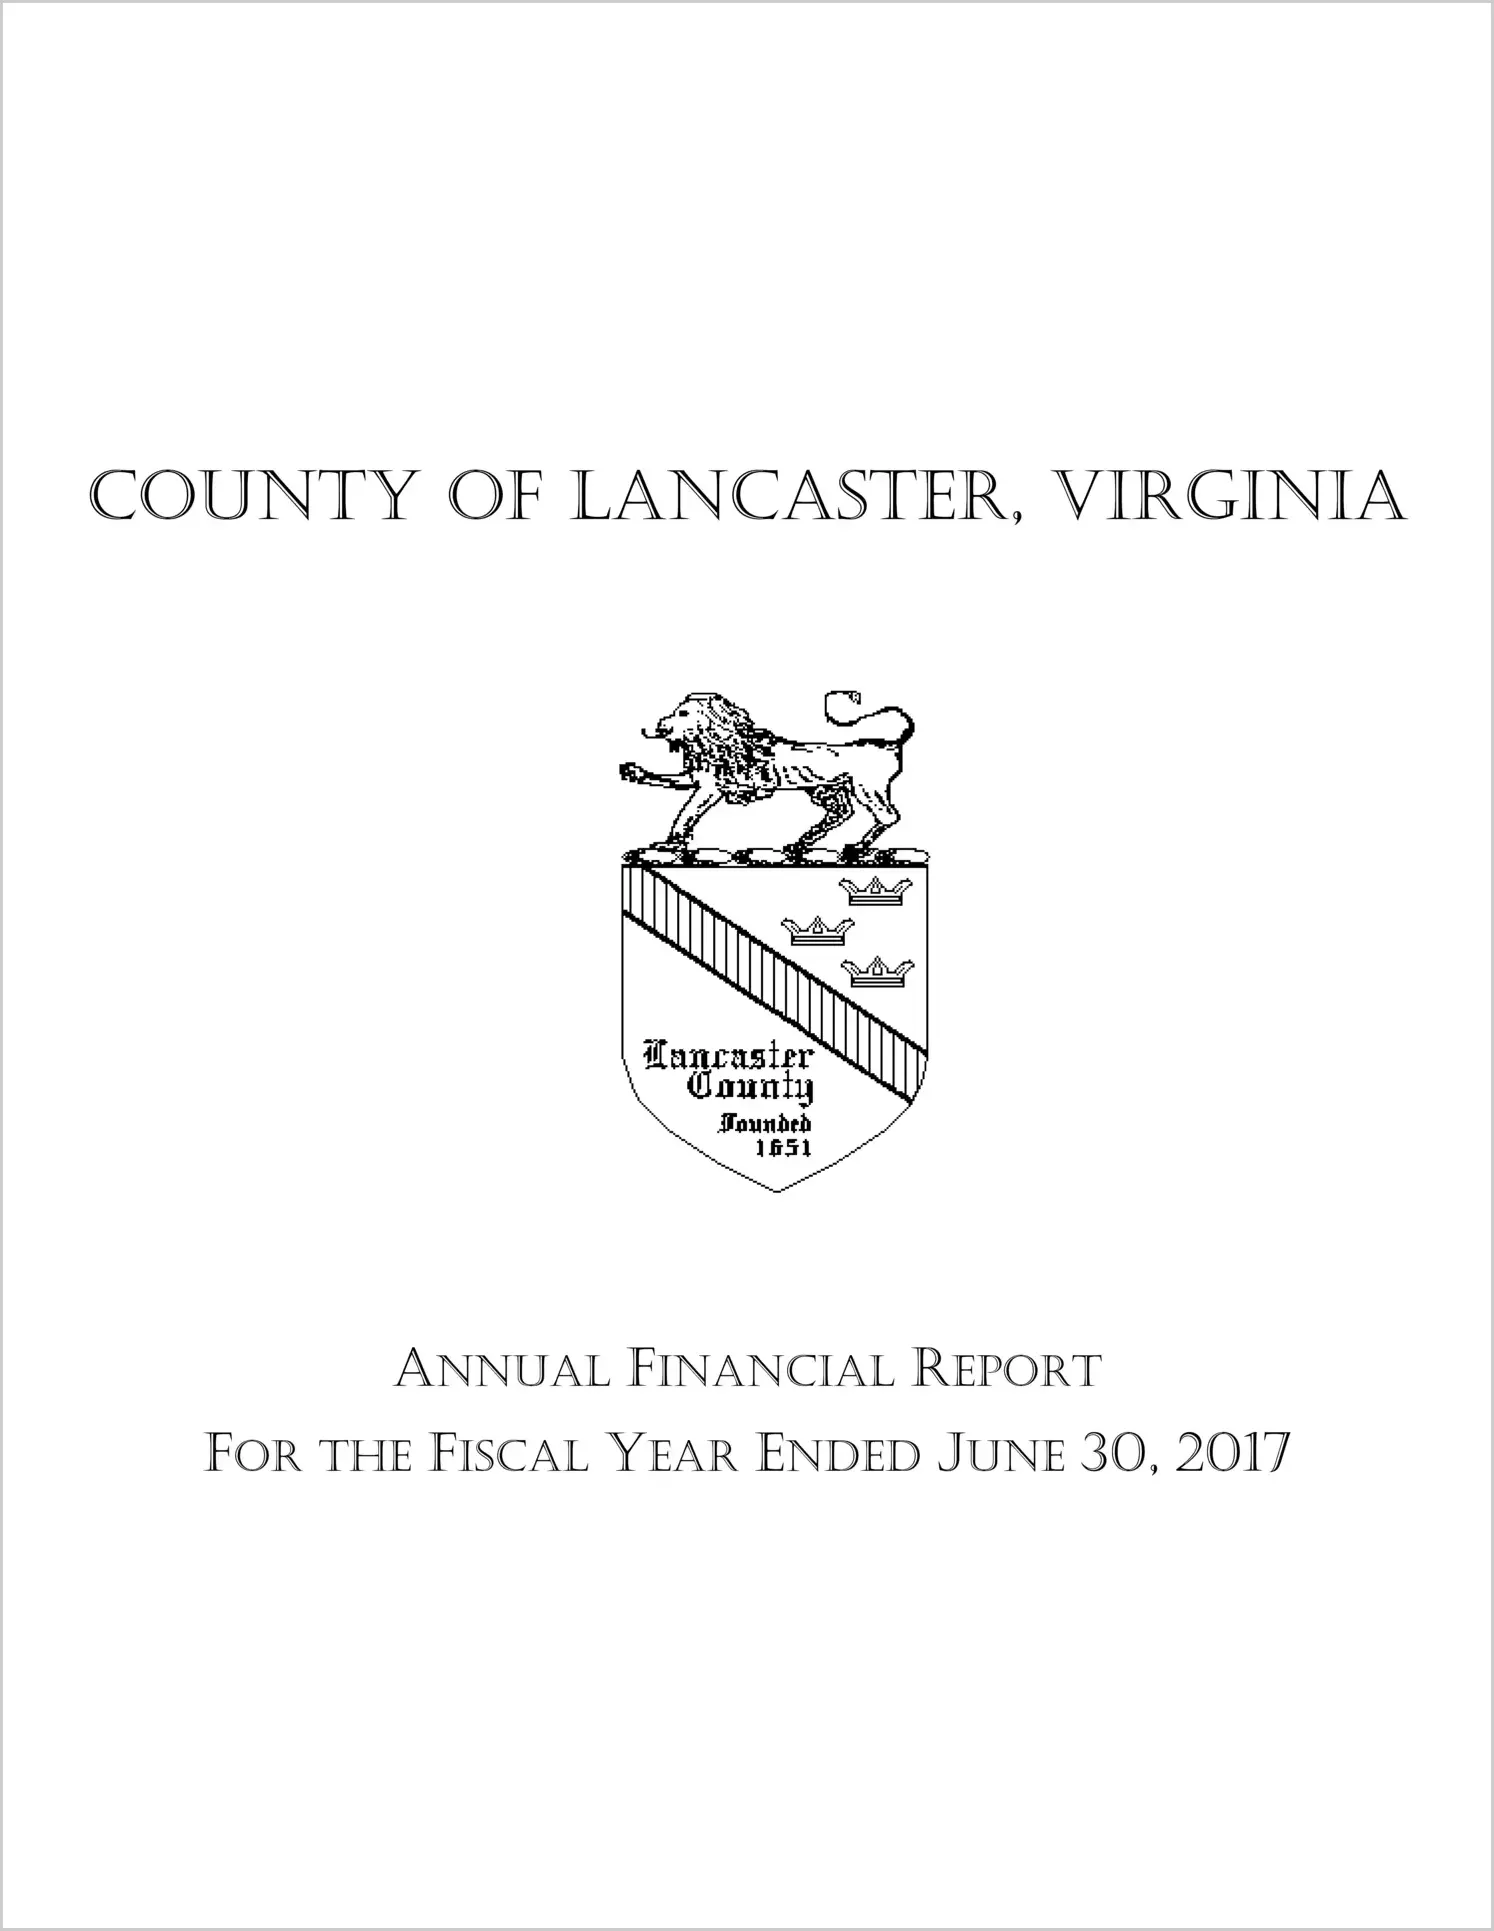 2017 Annual Financial Report for County of Lancaster